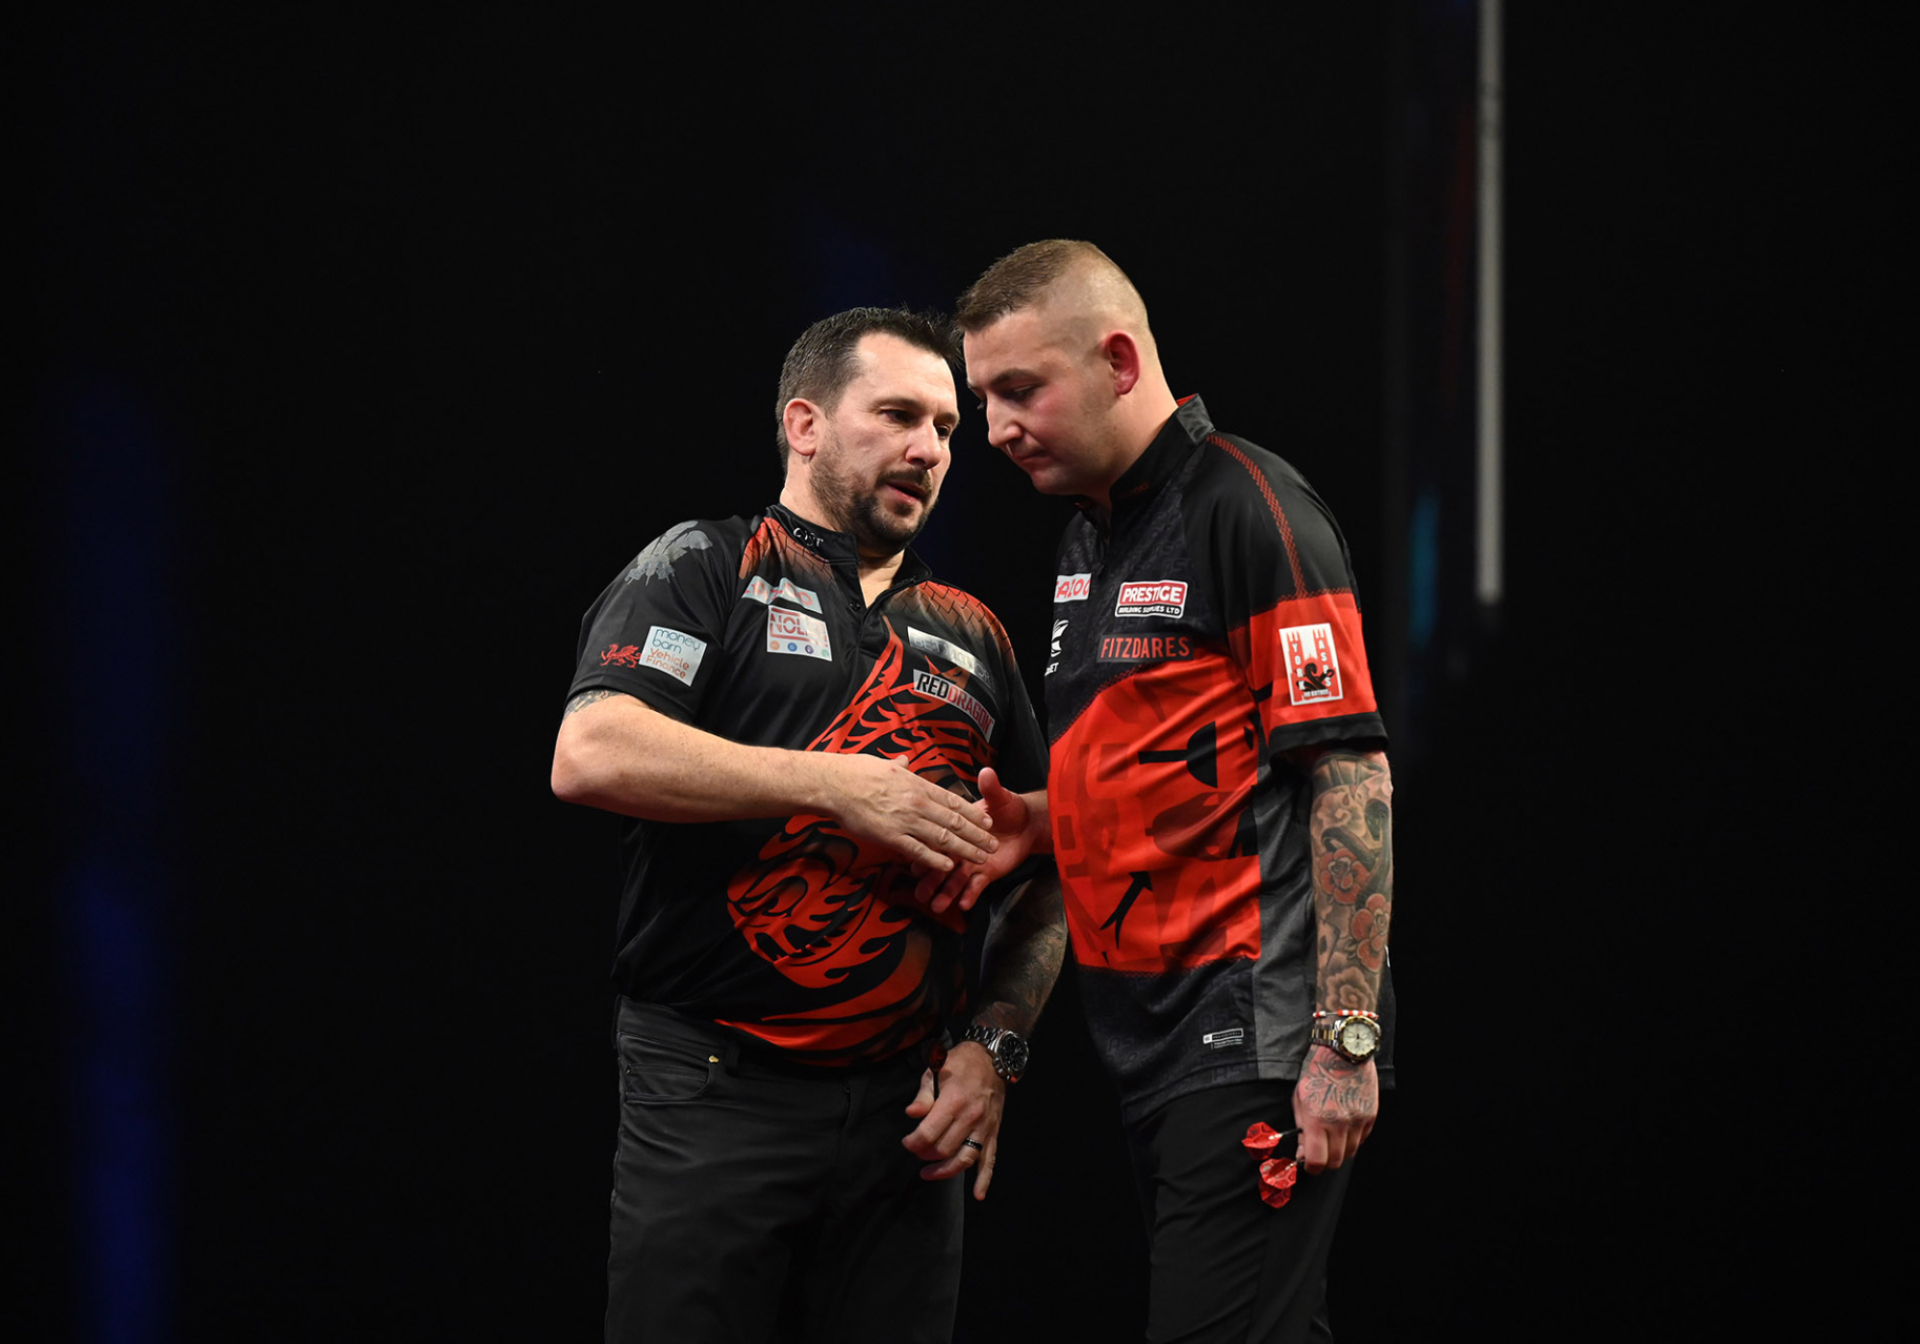 Clayton & Aspinall (Michael Cooper/PDC)